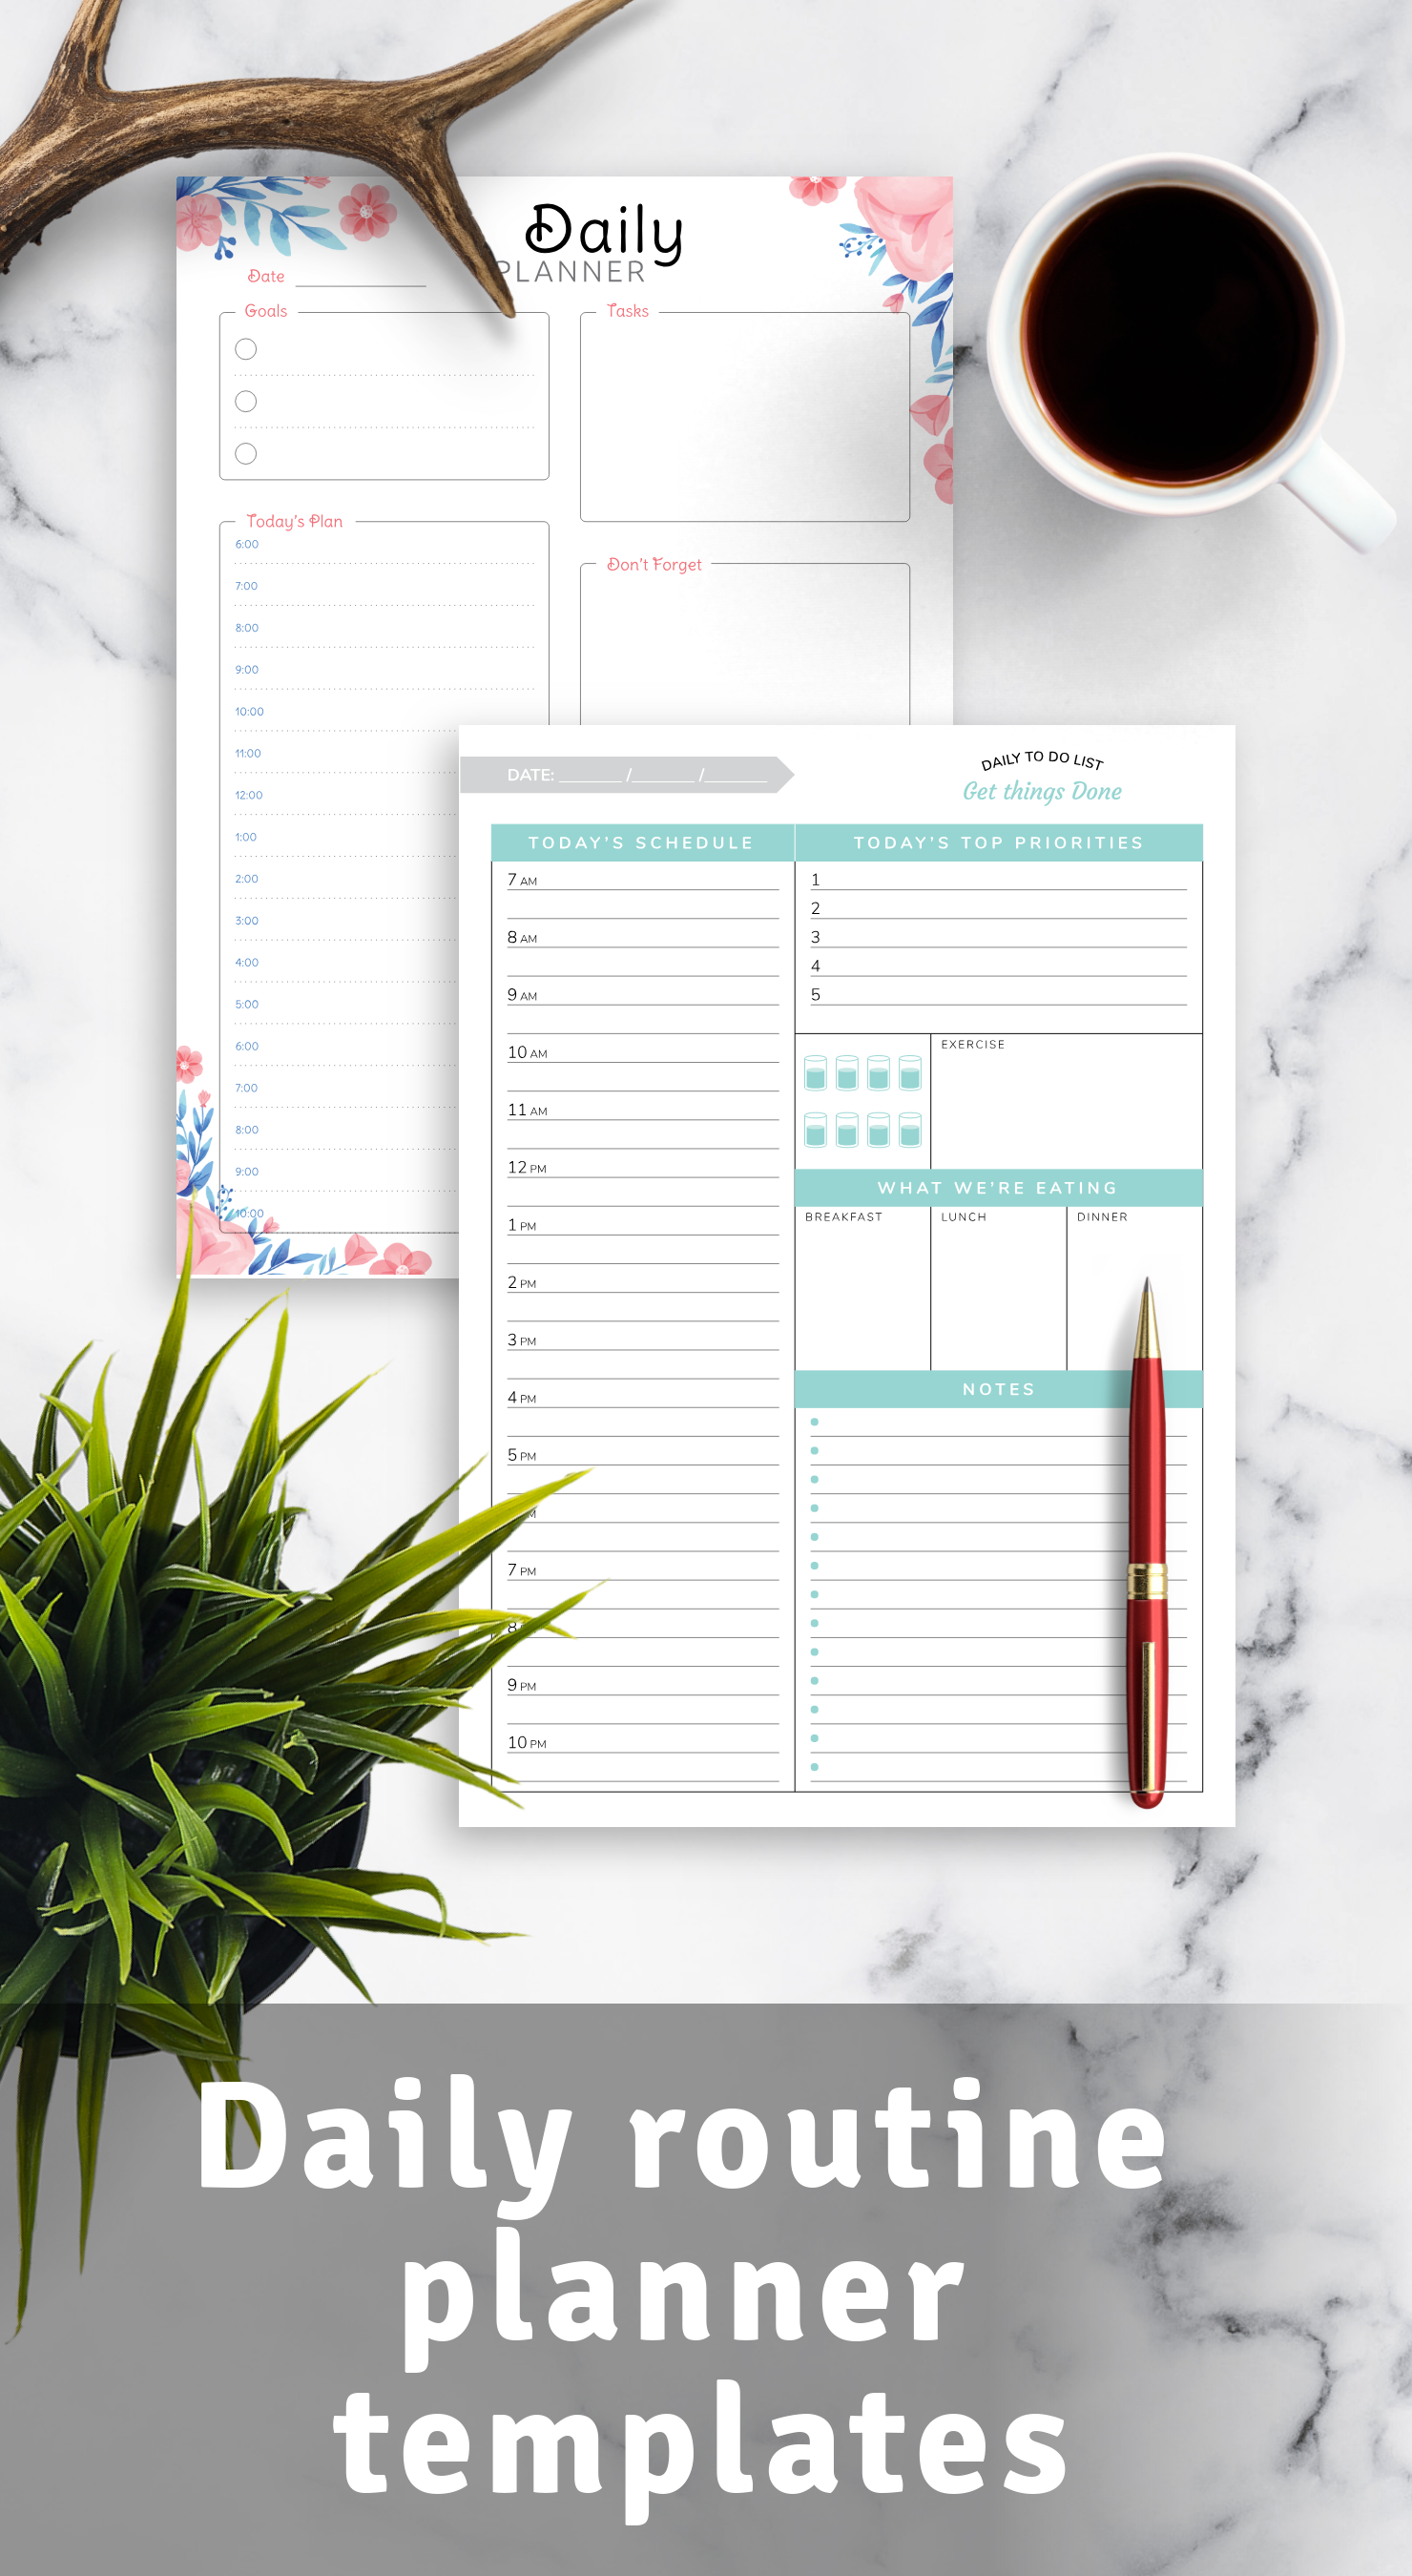 Download daily routine planner templates PDF